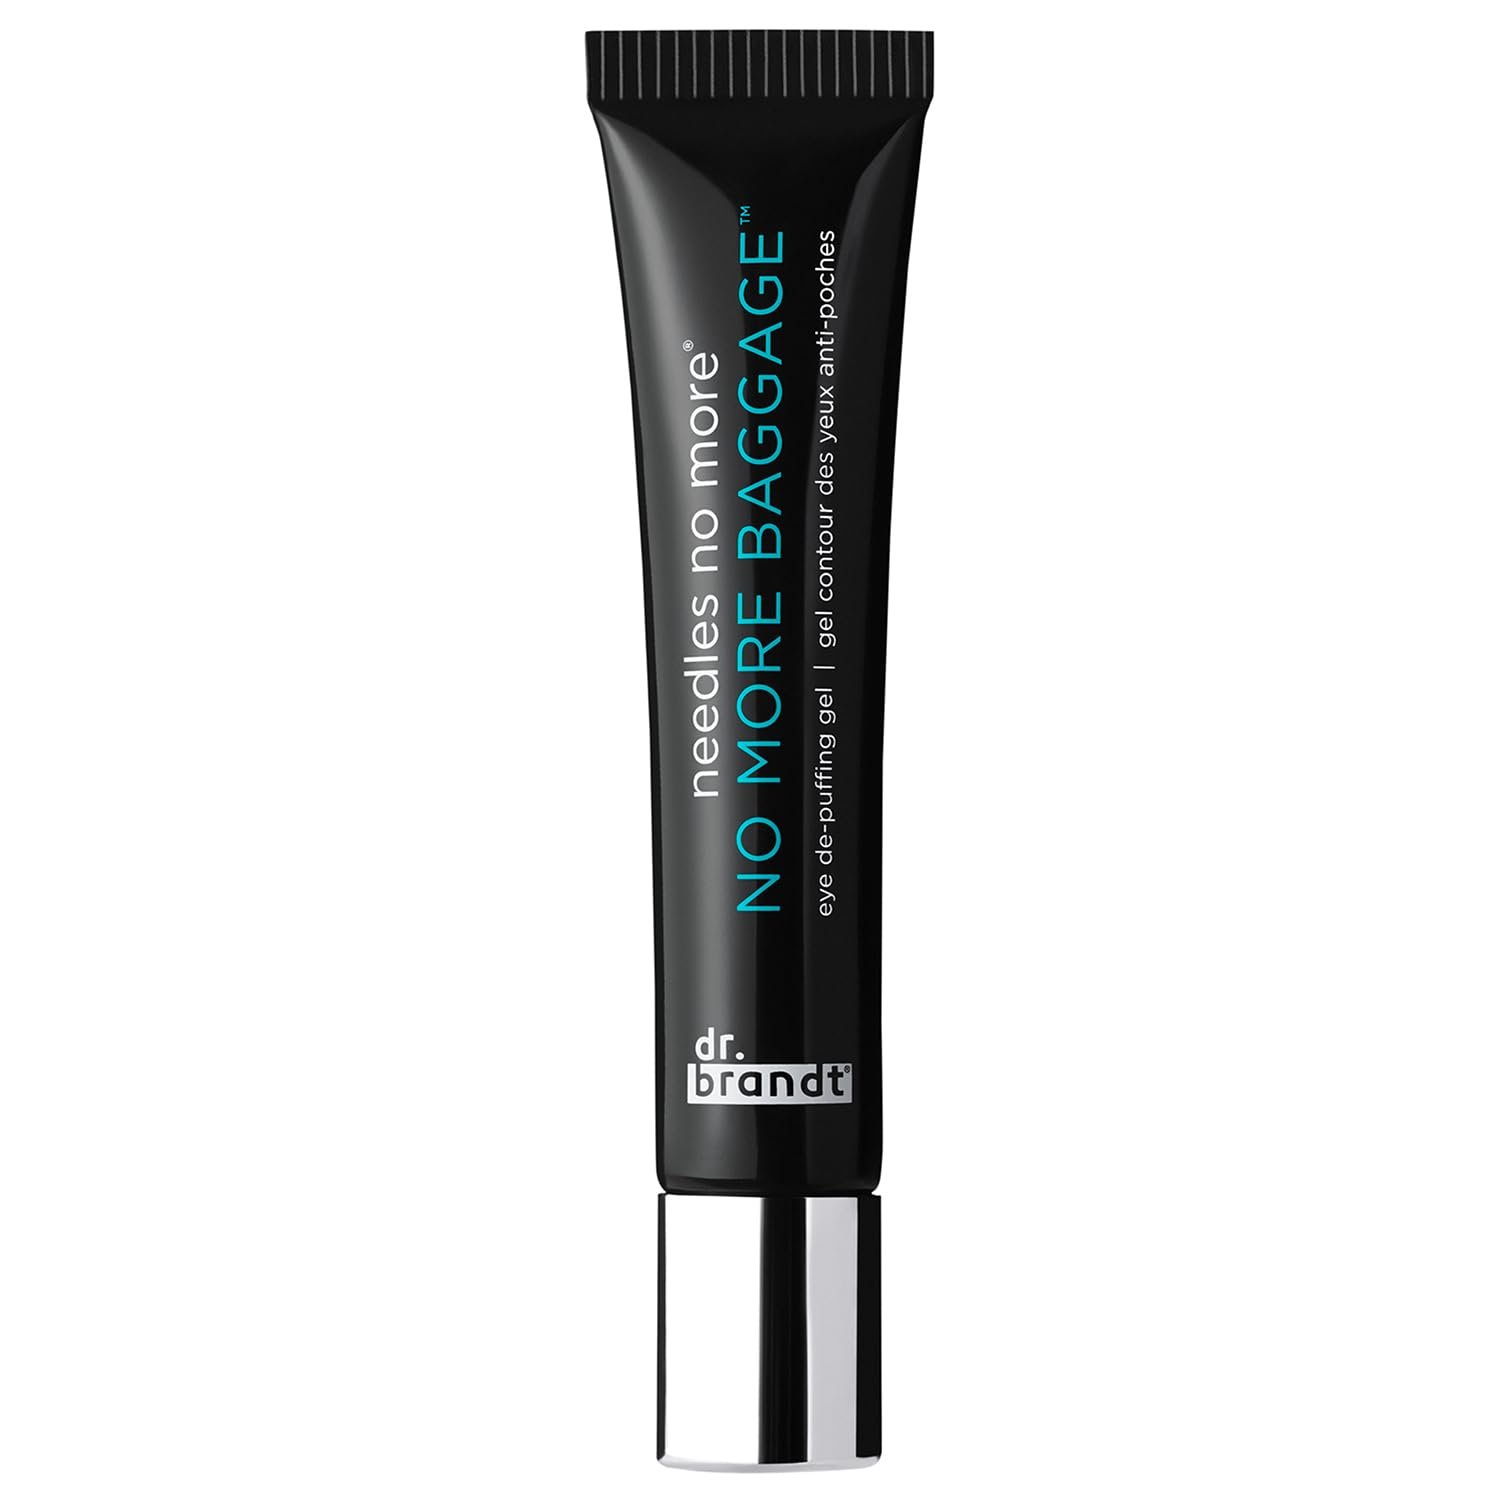 Dr. Brandt Needles No More Baggage Eye De-Puffing Gel. Minimizes Under-Eye Bags and Puffiness. Restore Elasticity and Firmness with Plant Extracts